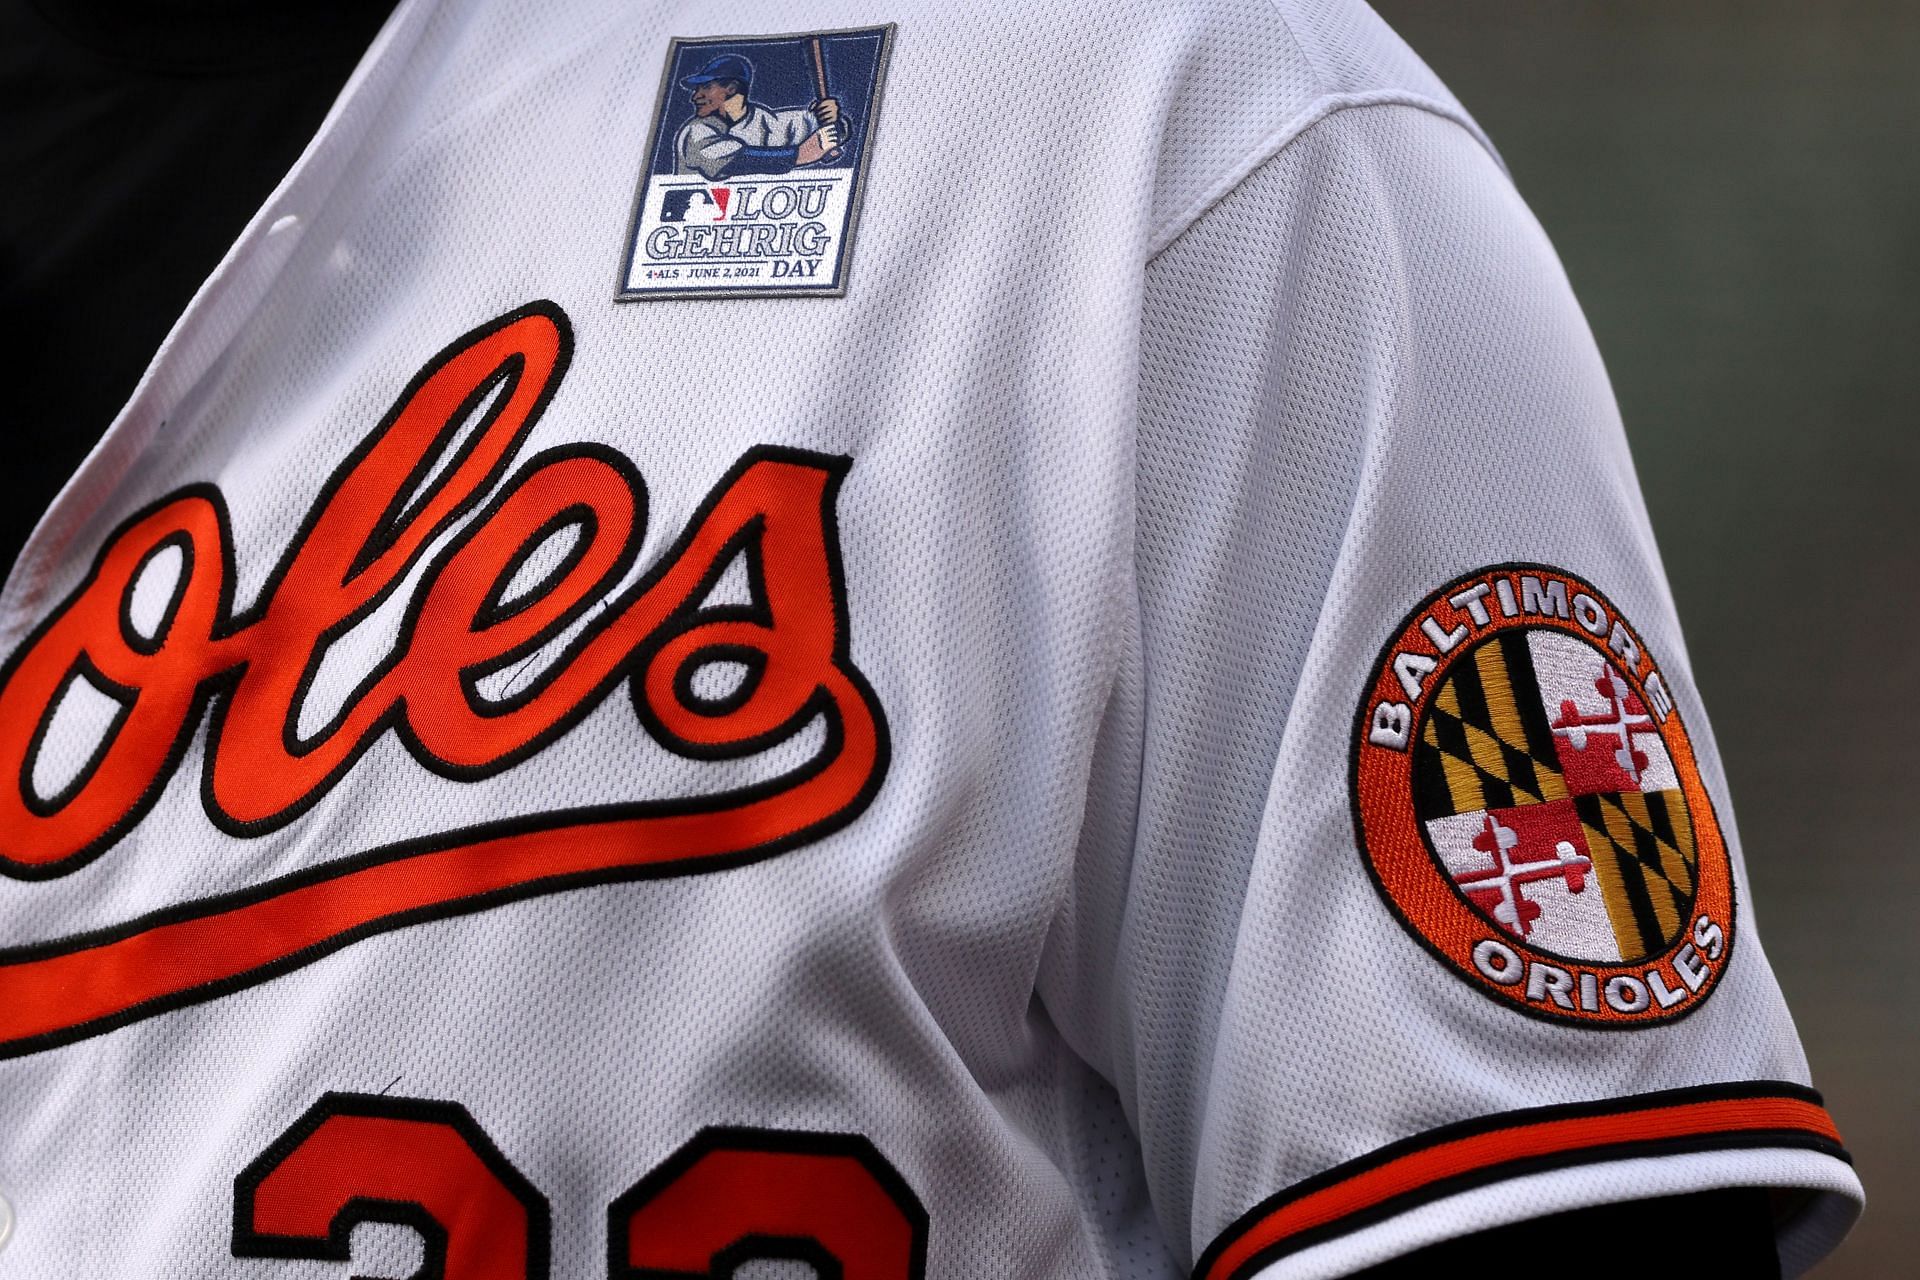 The Orioles City Connect uniforms are here and they aren't good